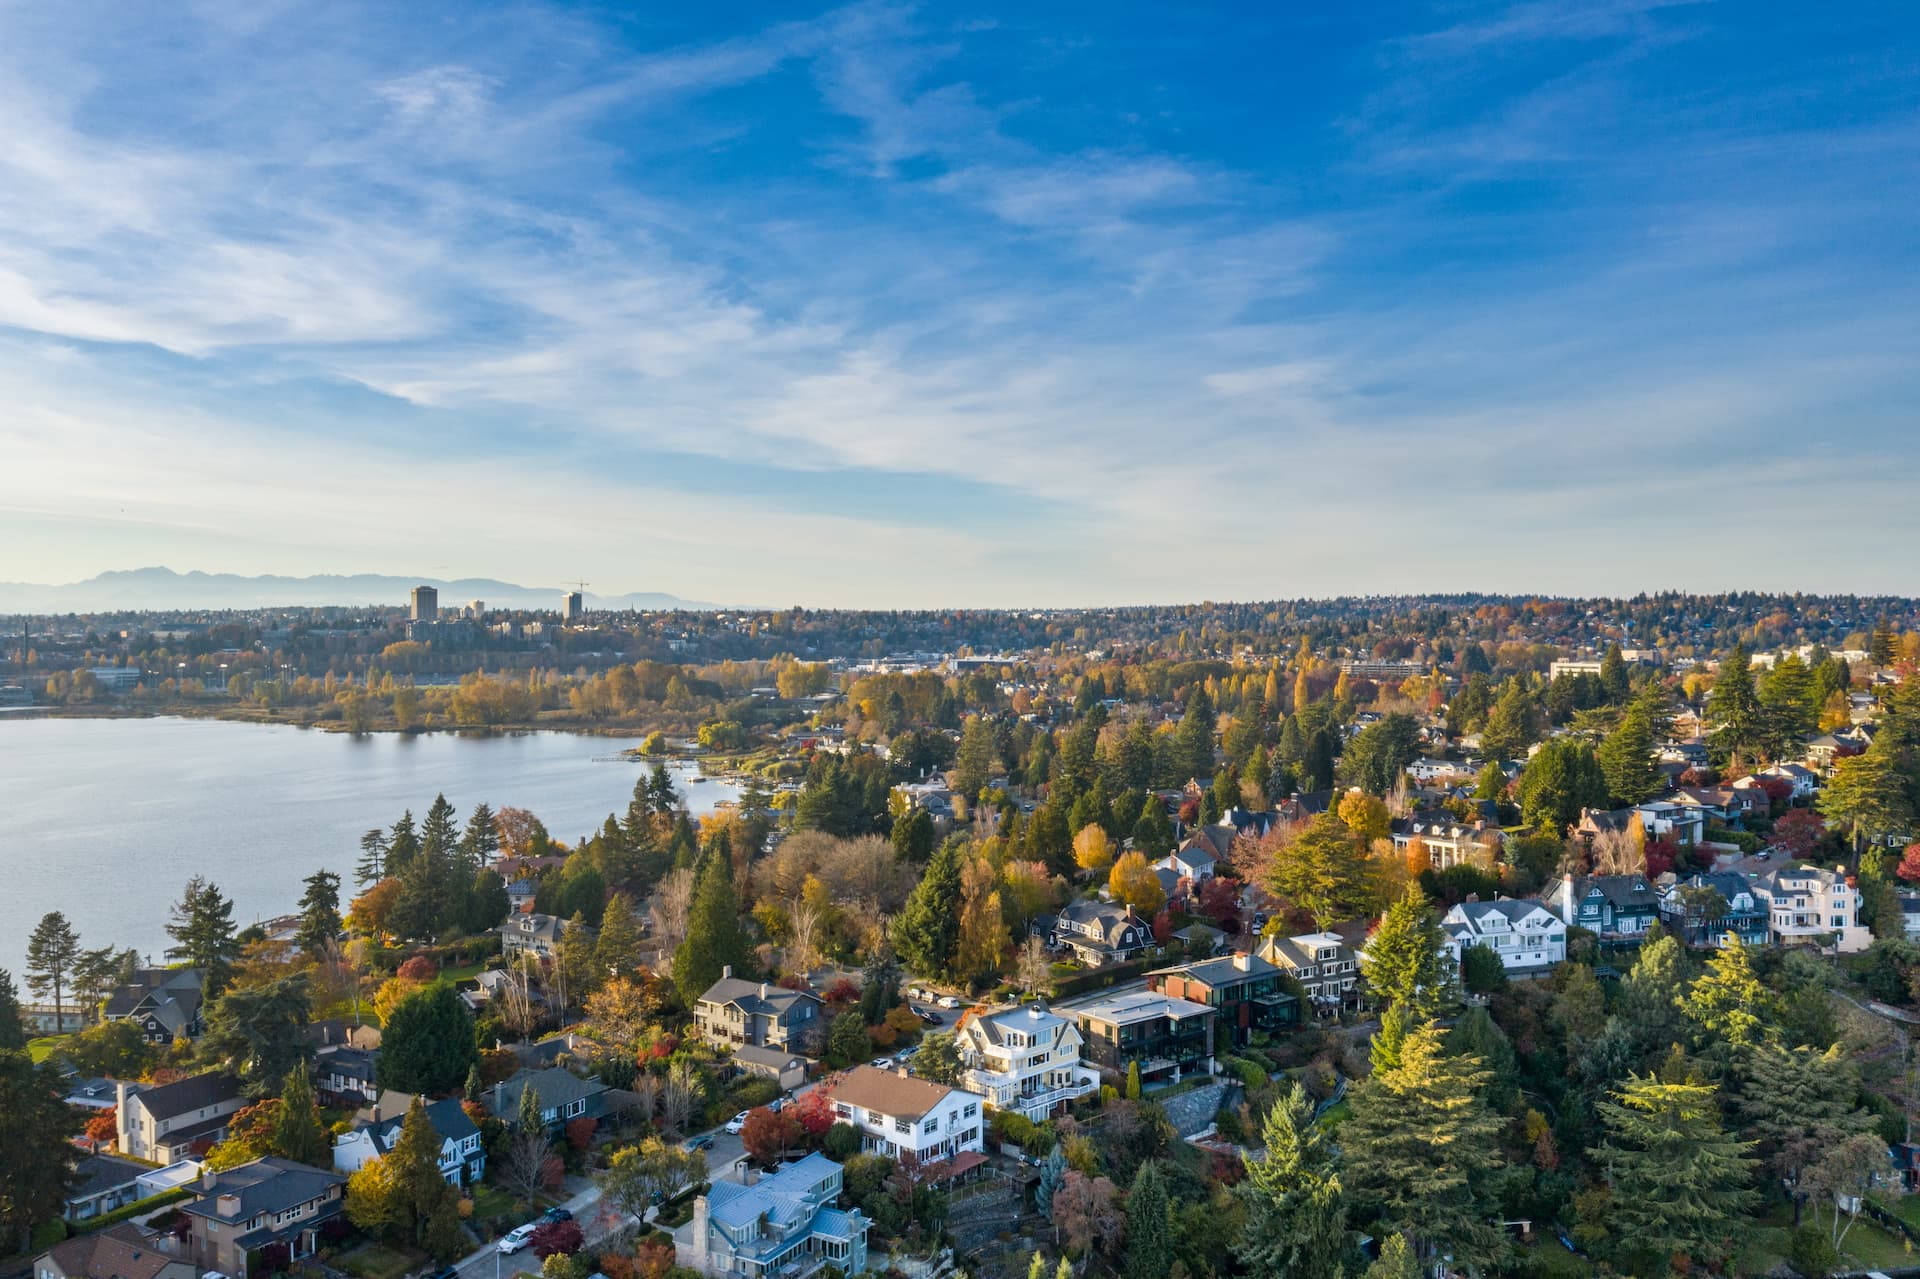 An aerial view of Seattle’s Laurelhurst neighborhood, with lots of trees, Lake Union to the left, and a bright blue sky in the background